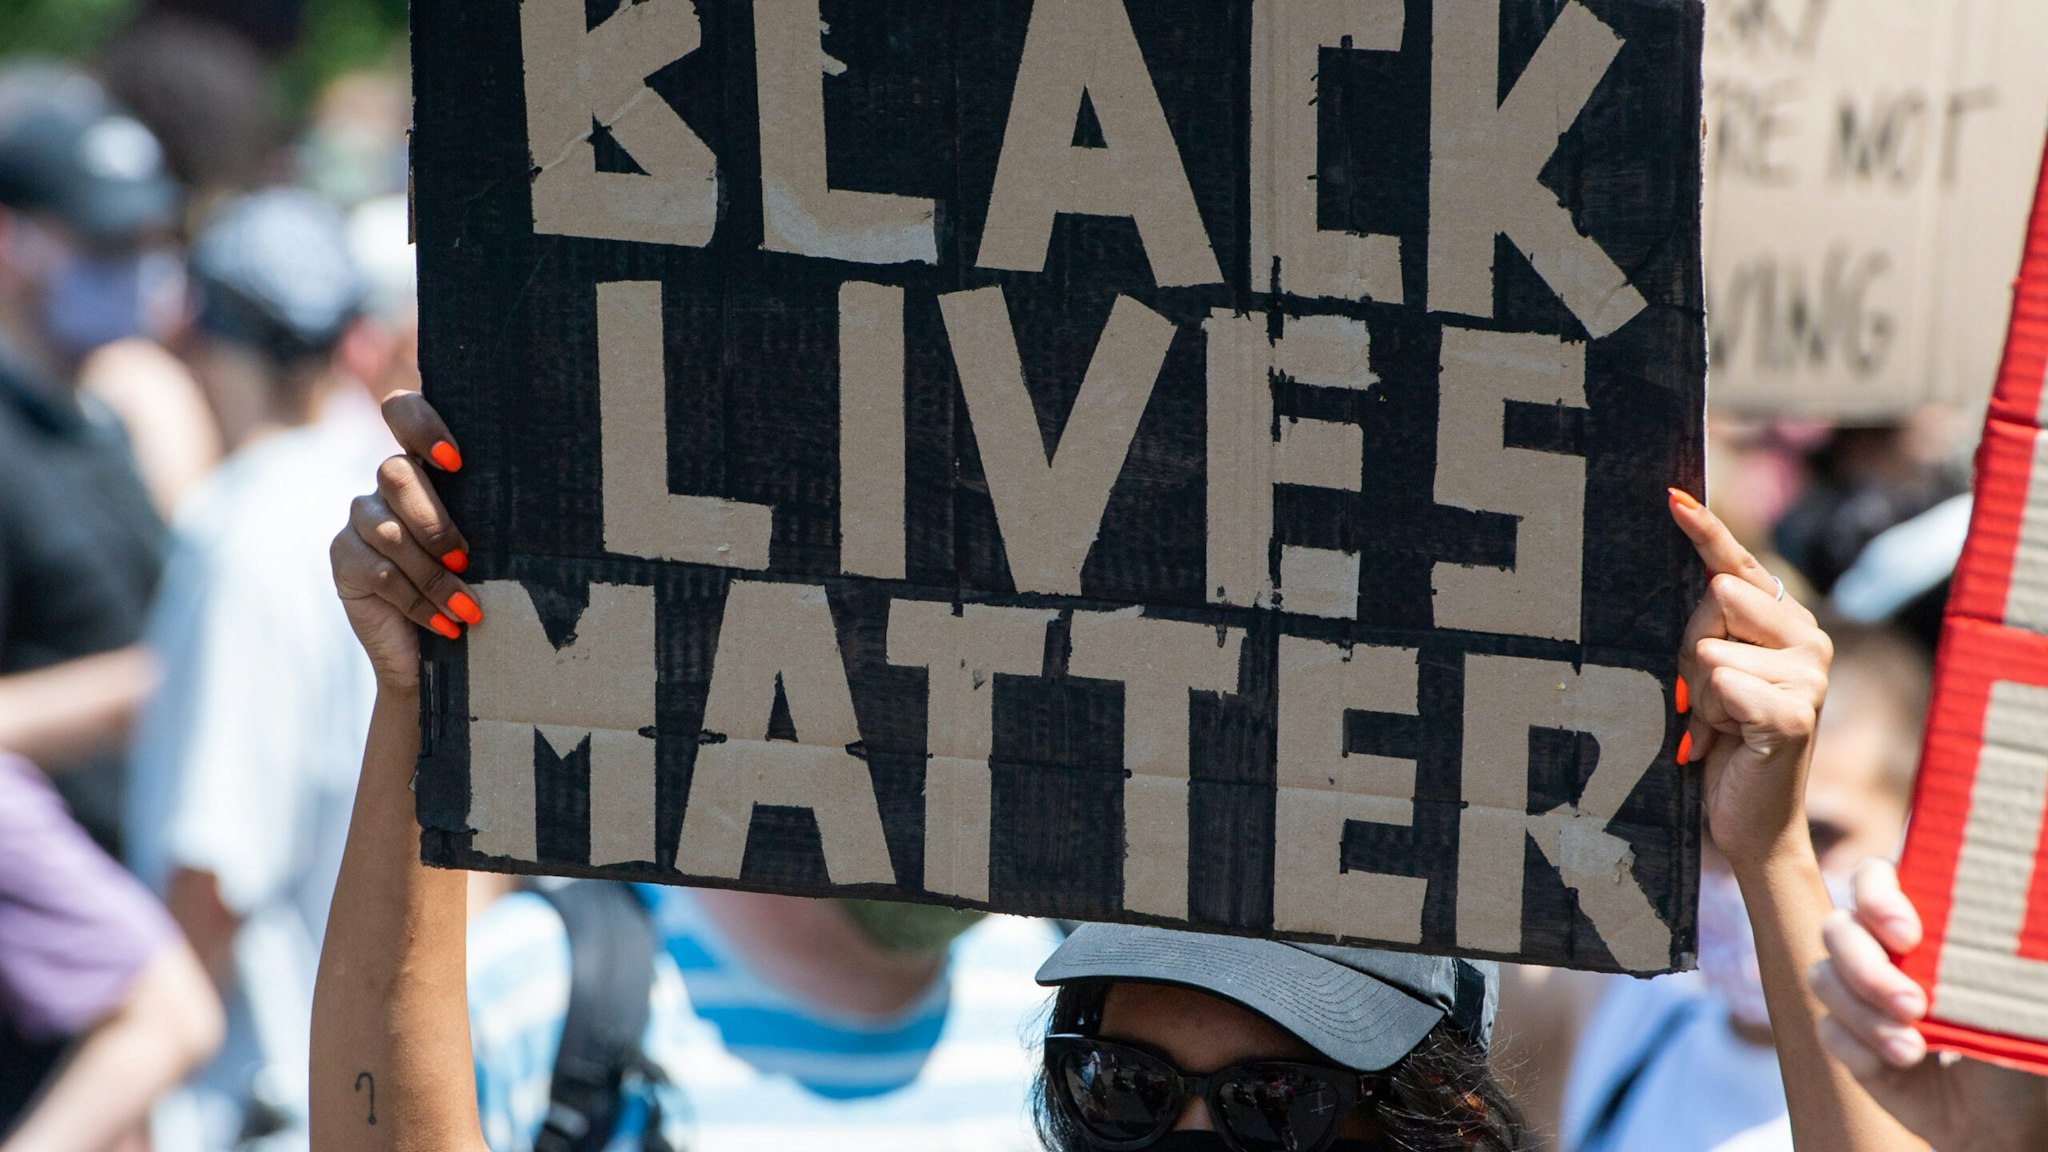 27 June 2020, Berlin: A participant of the "Black Lives Matter" demonstration holds a poster with the words "Black Lives Matter". More than 1000 people demonstrated against racism on the street of June 17. Photo: Christophe Gateau/dpa (Photo by Christophe Gateau/picture alliance via Getty Images)